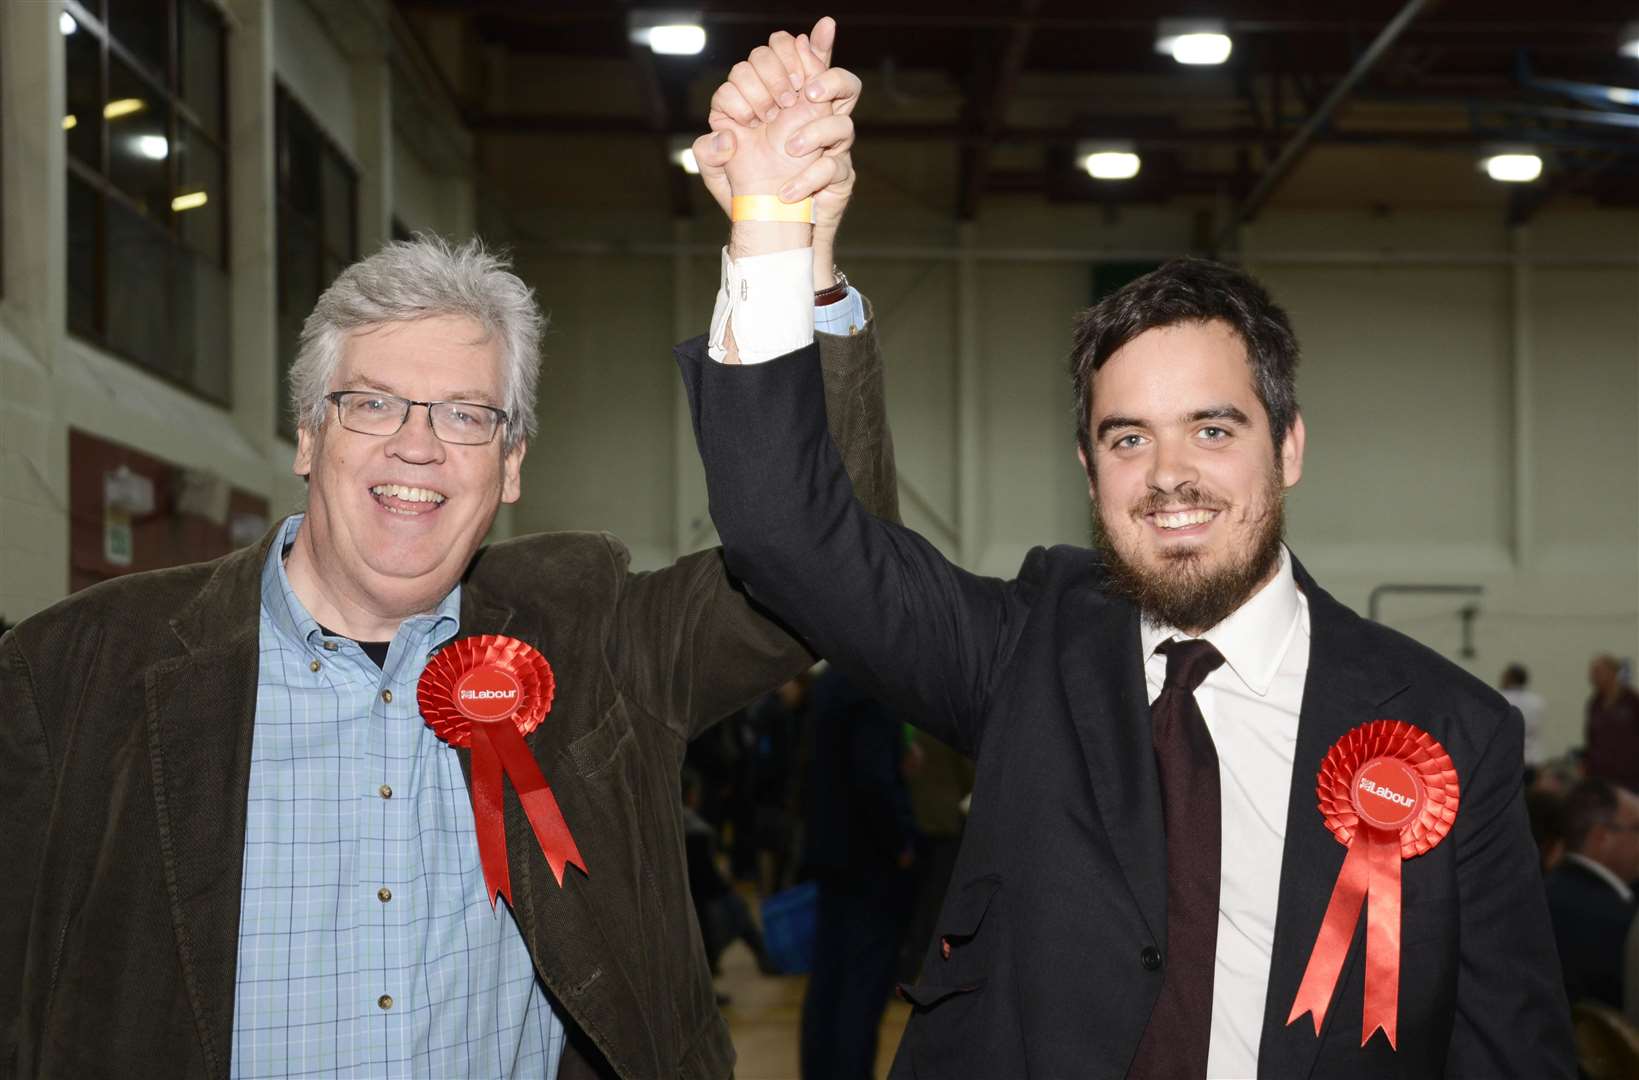 Alex Ward celebrates his election to Ashford Borough Council with proud dad David last May. Picture: Paul Amos